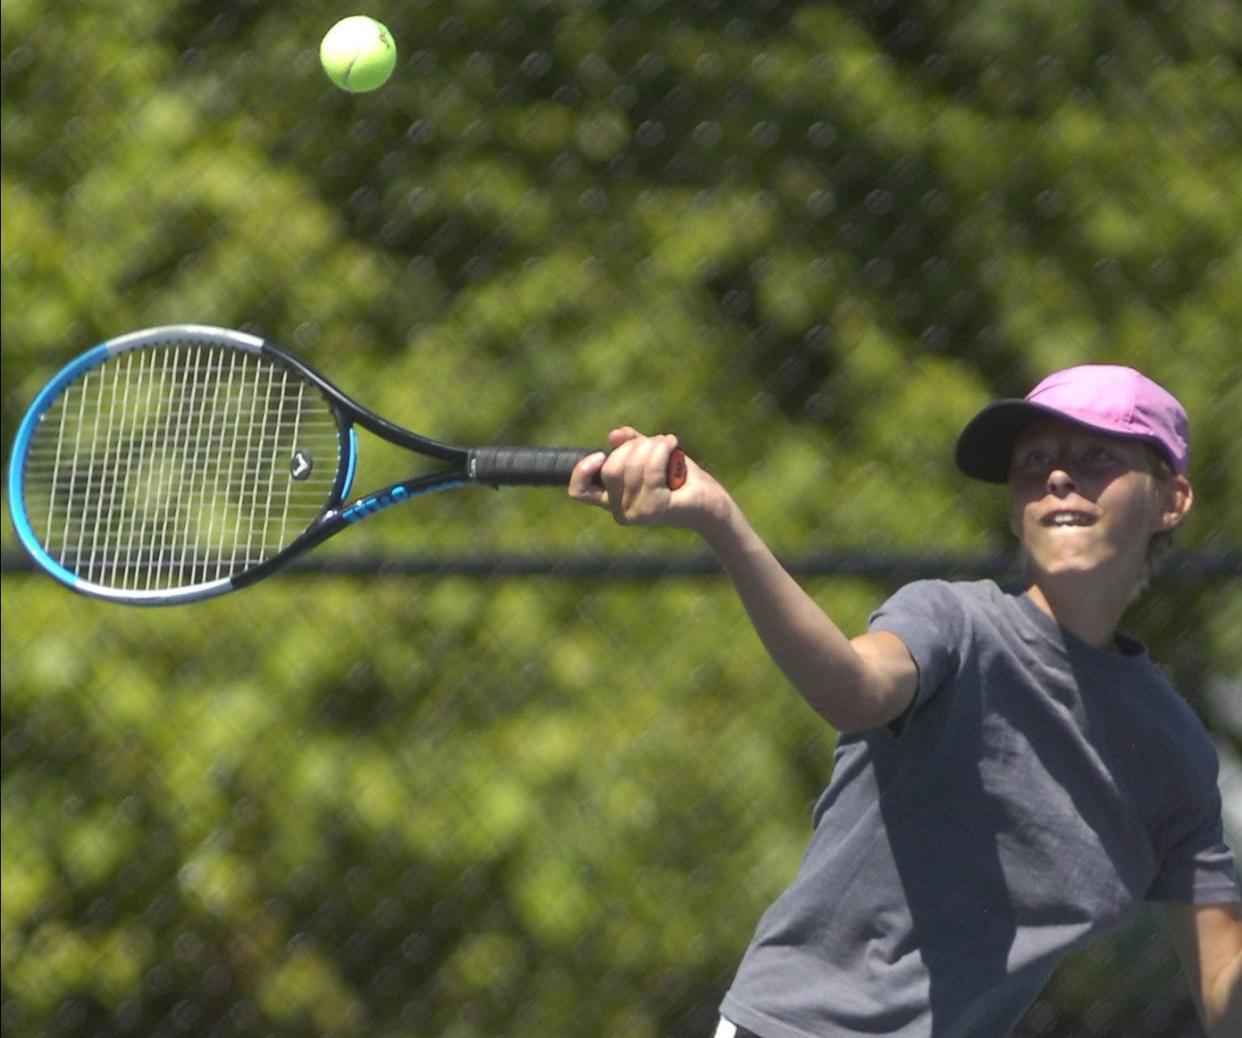 David Swartzentruber during junior division play of the T-G Tennis Open at Brookside Park Friday, June 24, 2022.